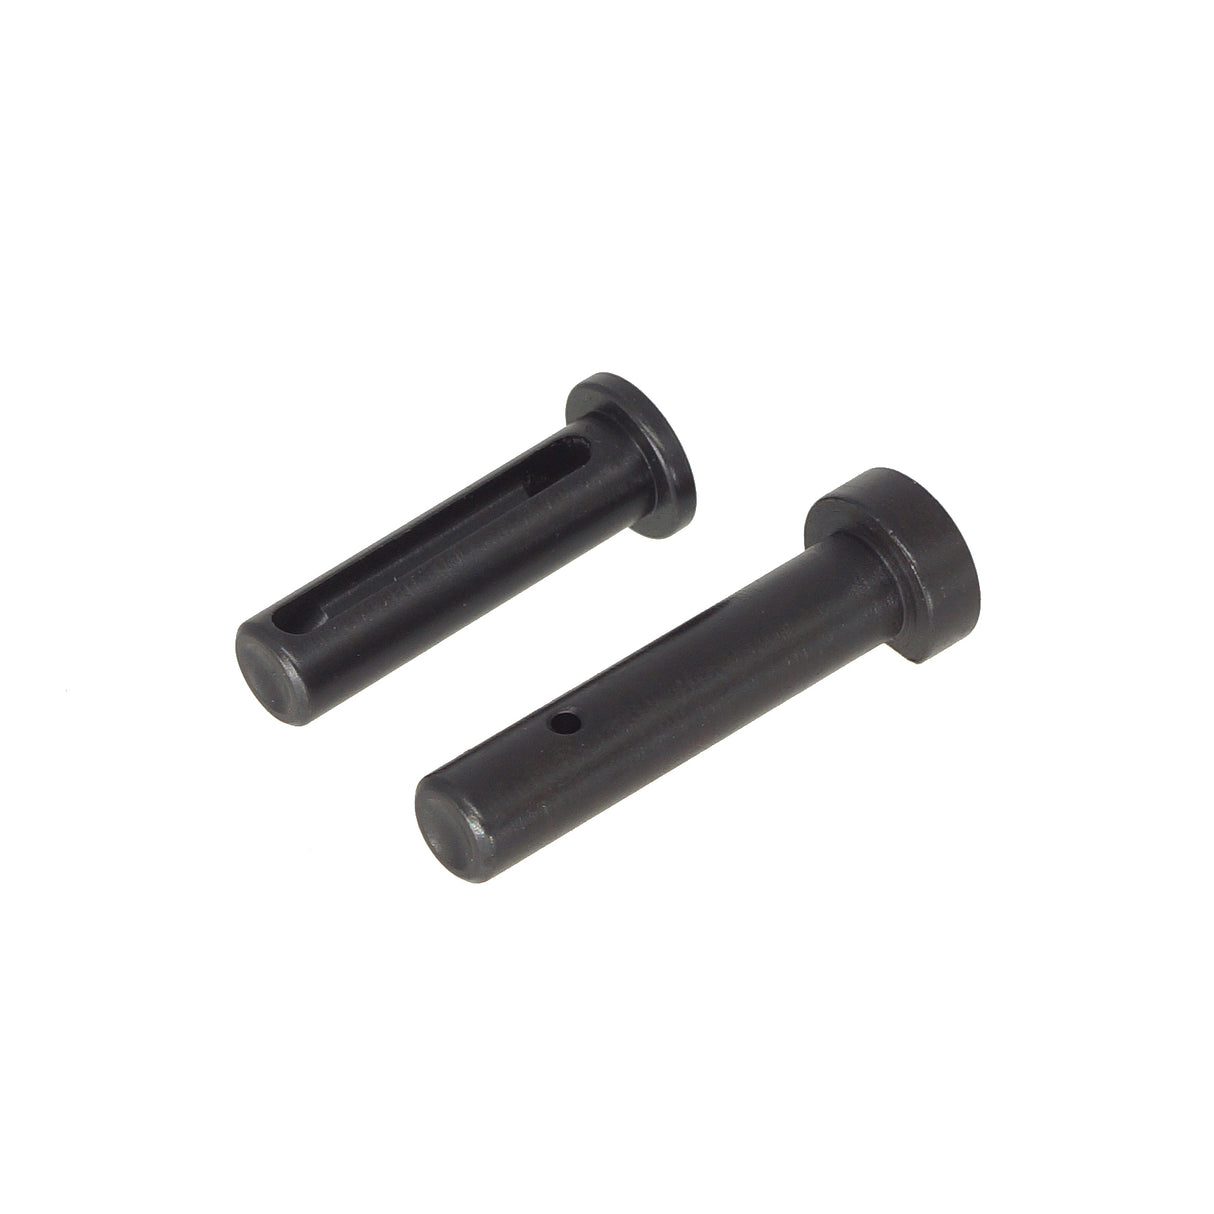 CYMA CGS Steel Receiver Pin Concave Type for AR / M4 GBB ( CGS-OT-0003 )